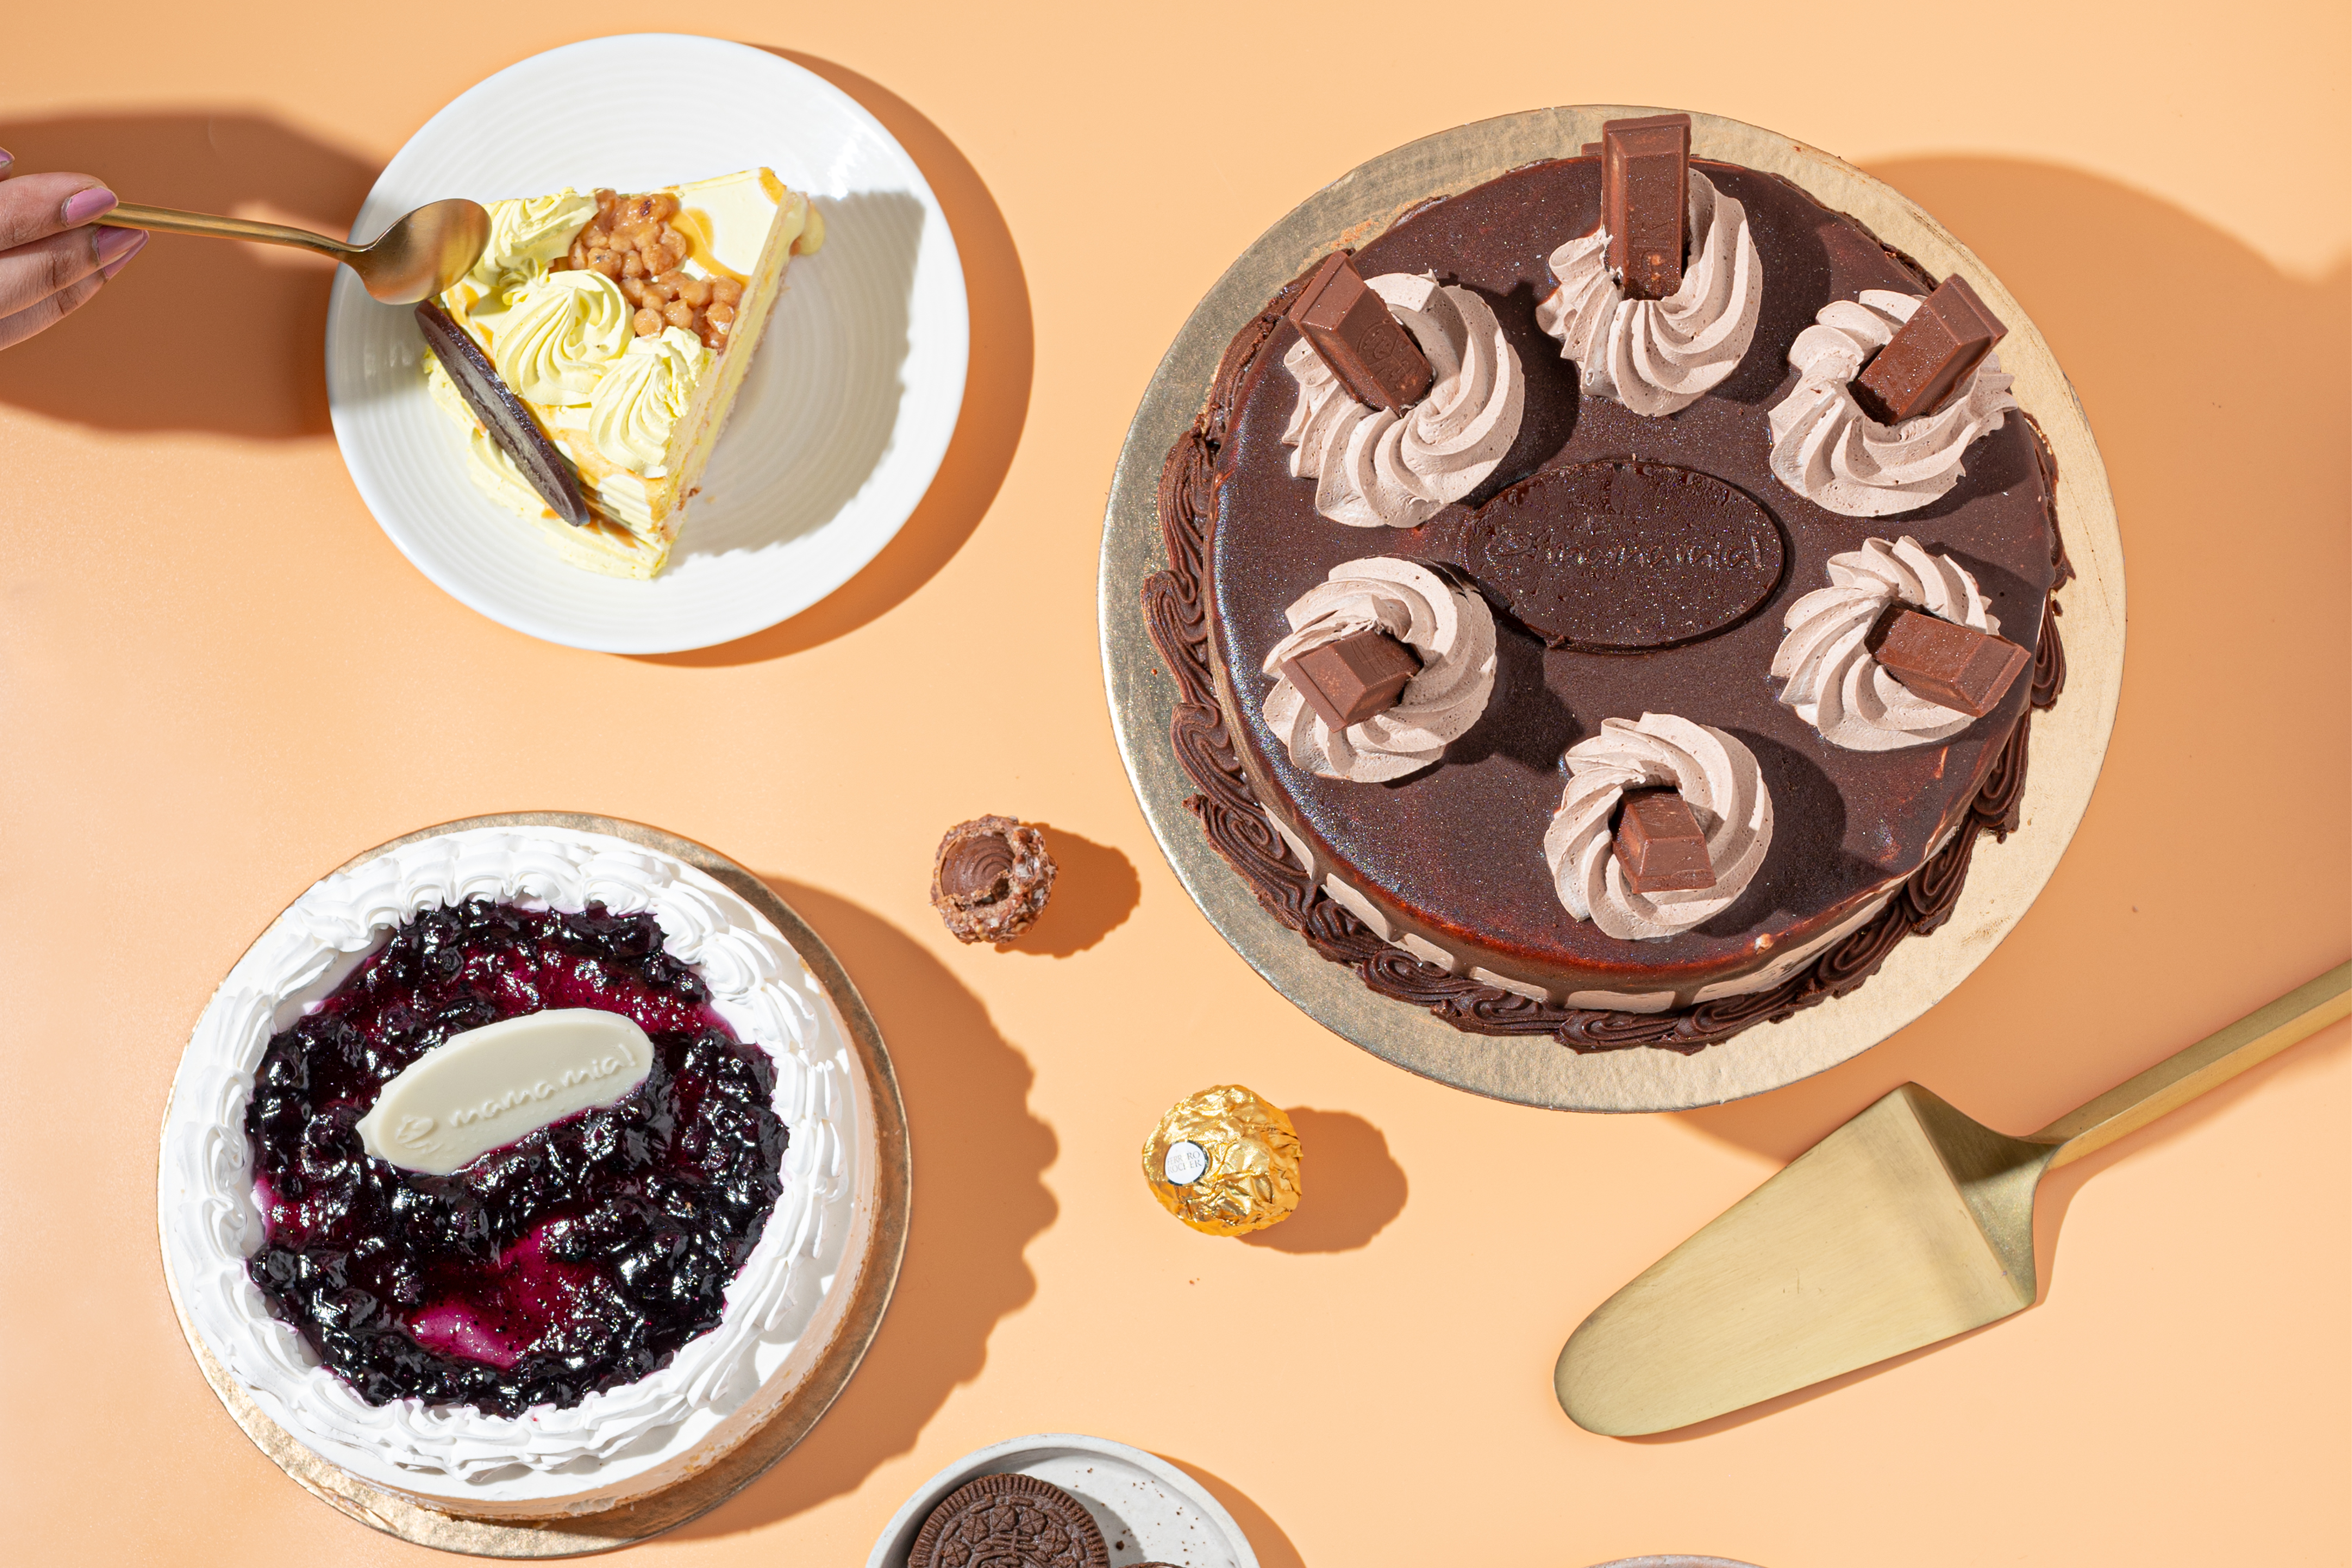 Explore Sweet Horizons: 10 Cake Trends for You!